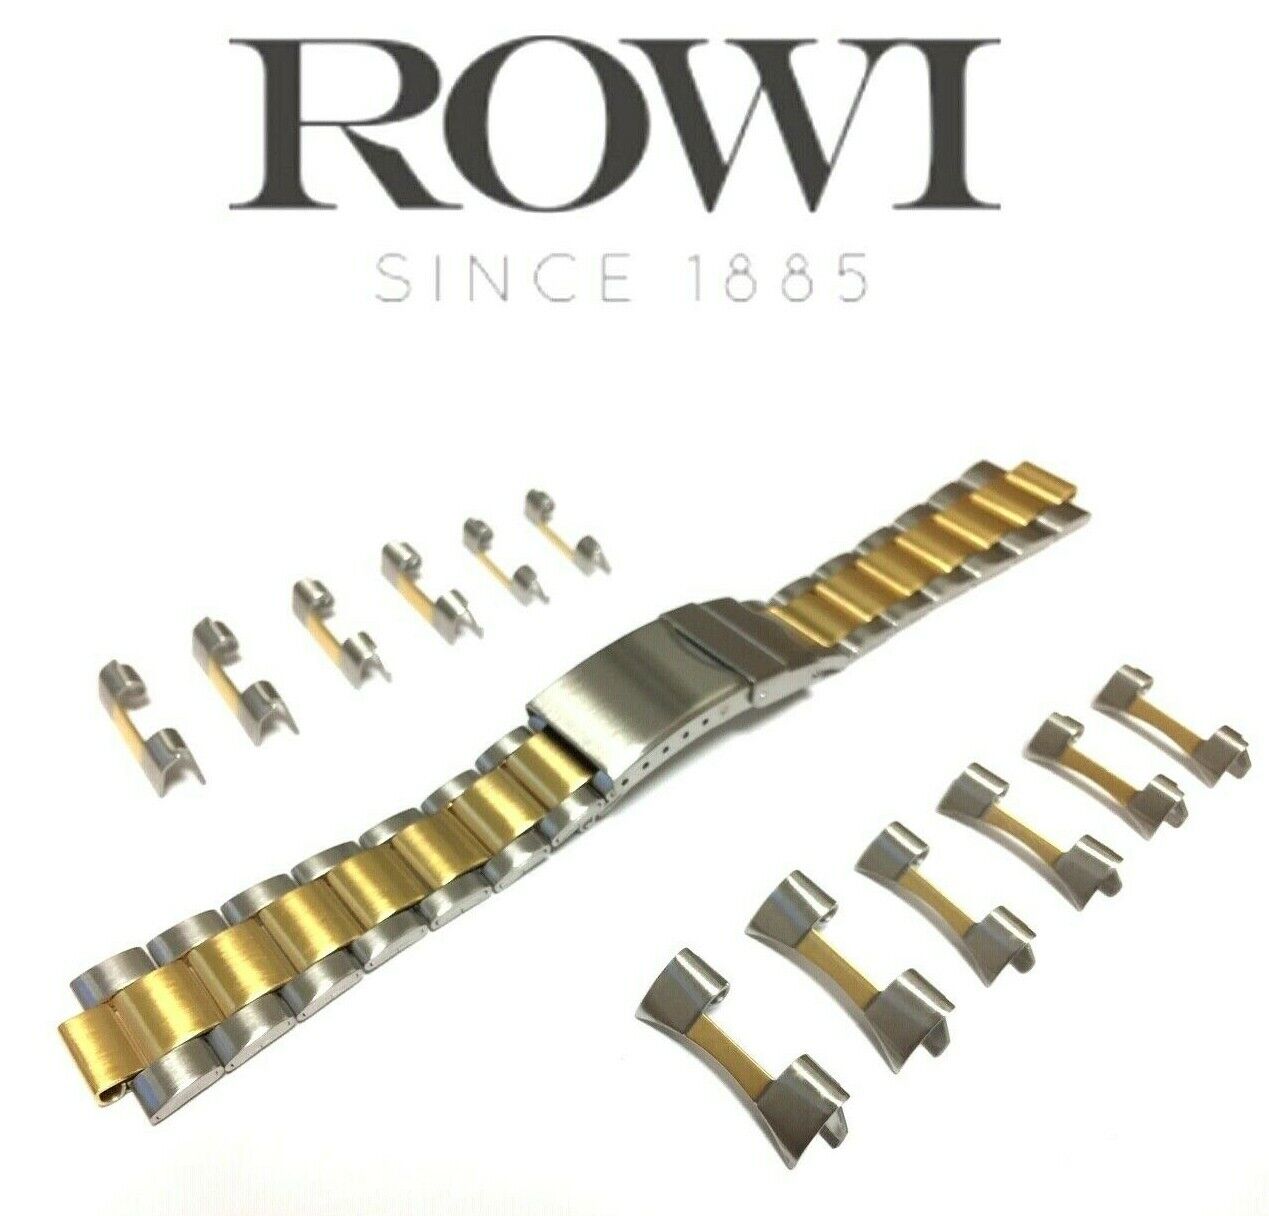 NEW 18mm 20mm 22mm ROWI 304197 STAINLESS STEEL/GOLD PLATED BRACELET WATCH BAND